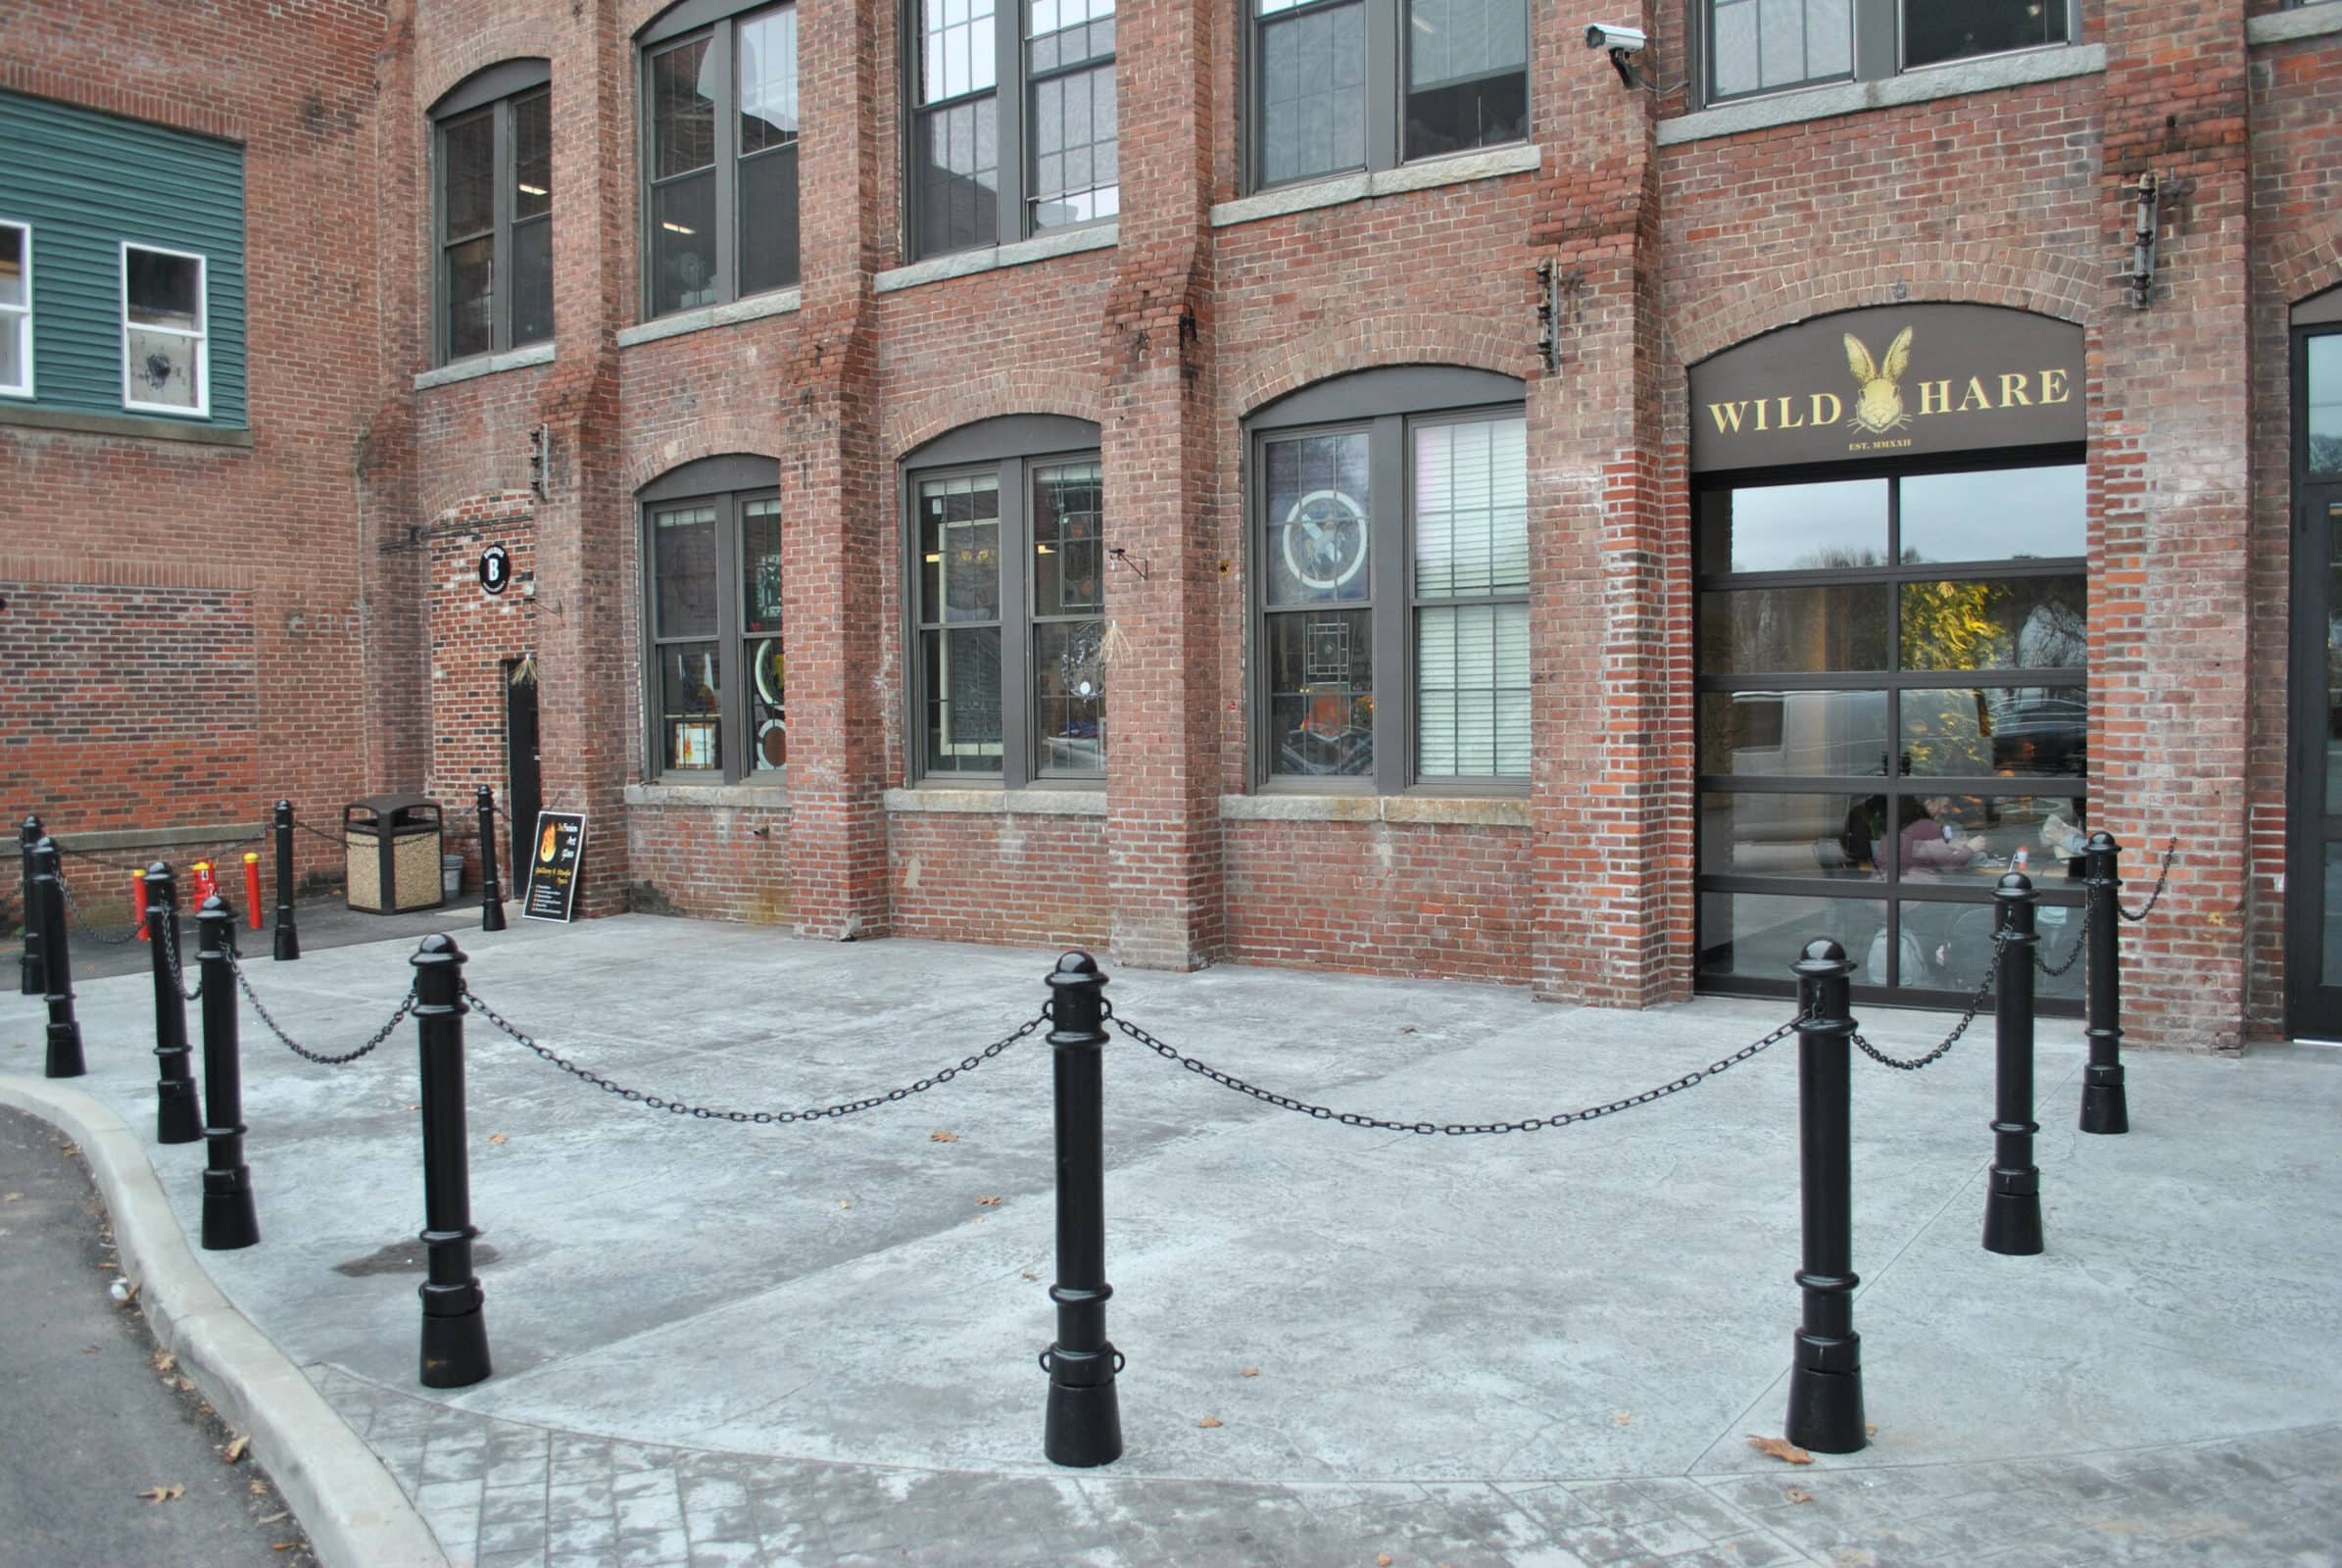 Hudson Select Board approves outdoor dining permit for Wild Hare restaurant/brewery